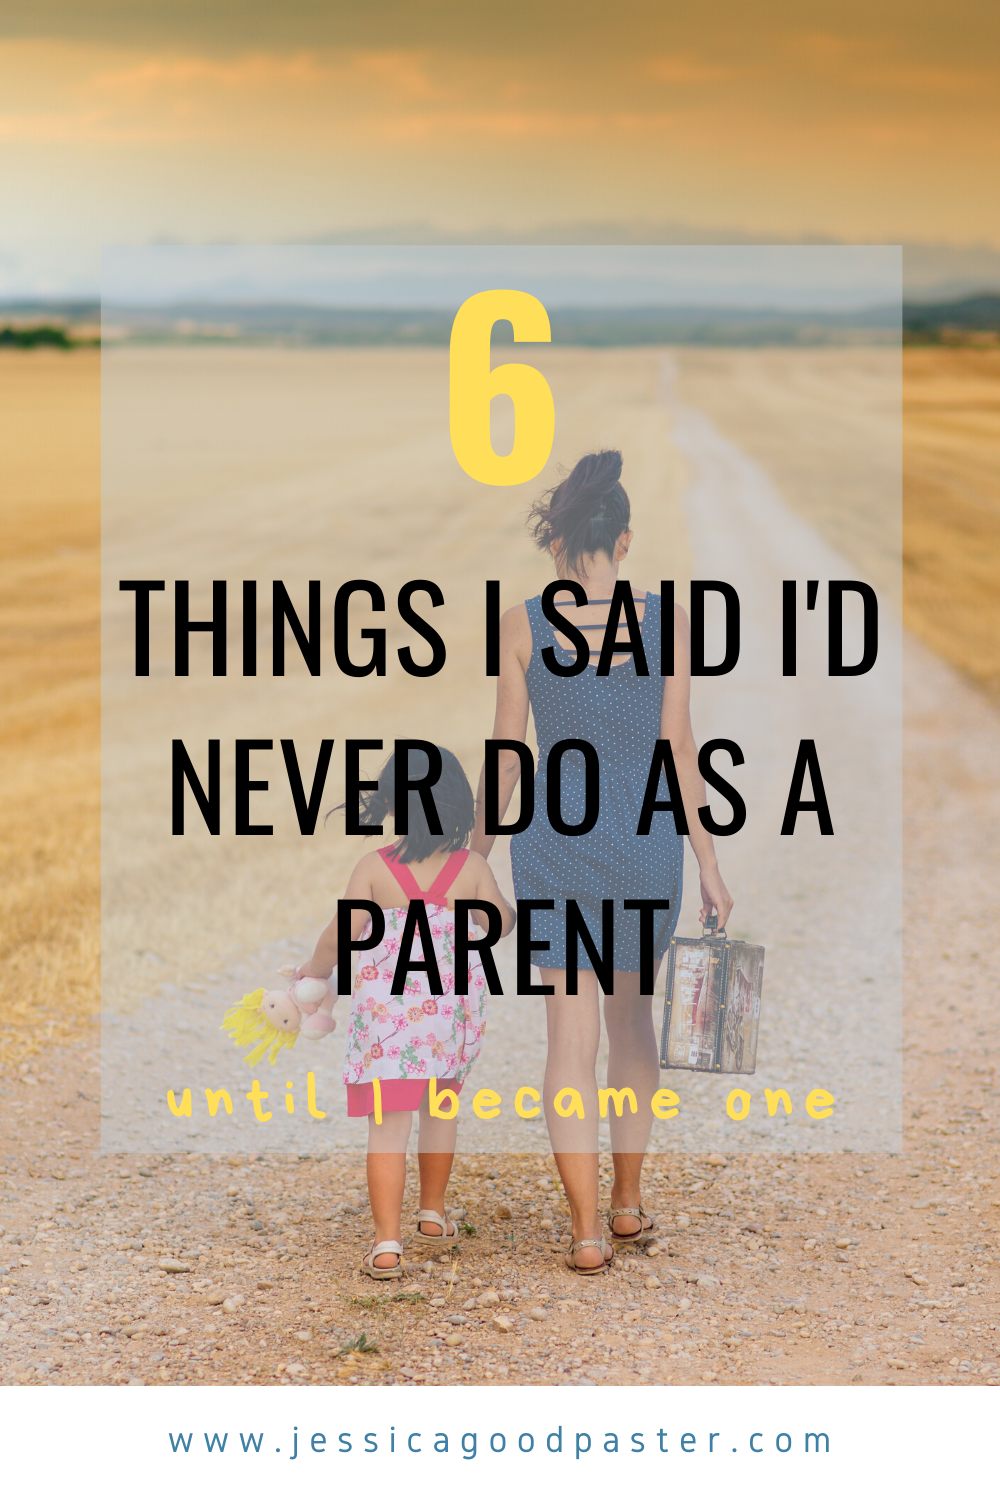 Did you think you were a parenting expert before you had kids? Things definitely change! Read one mom's confessions on the reality of being a parent and the six things she said she'd never do as a parent...until she became one! #parenting #parentingfail #keepitreal #momlife